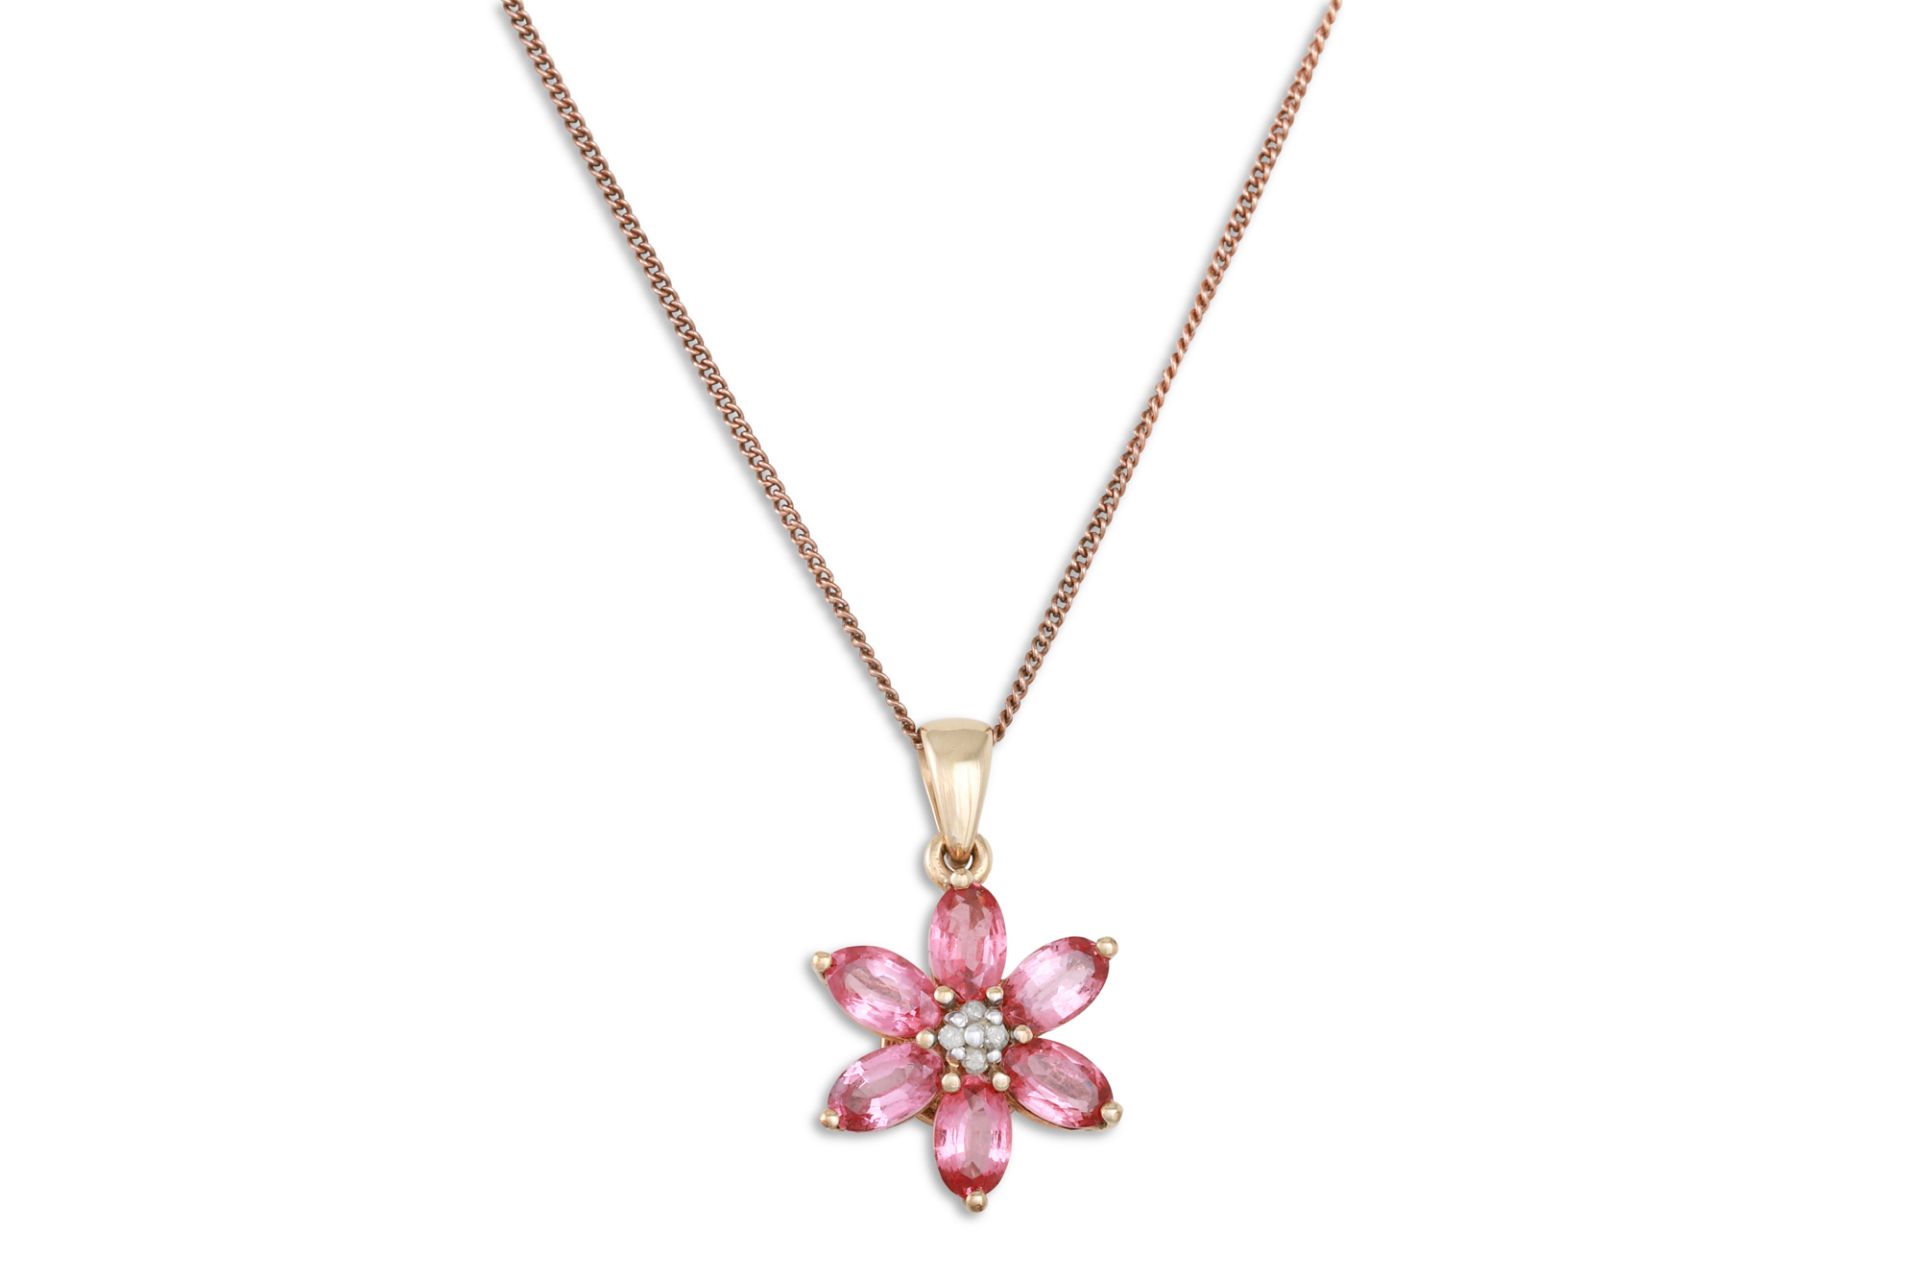 A PINK TOPAZ AND DIAMOND CLUSTER PENDANT, in the form of a flower, on a chain